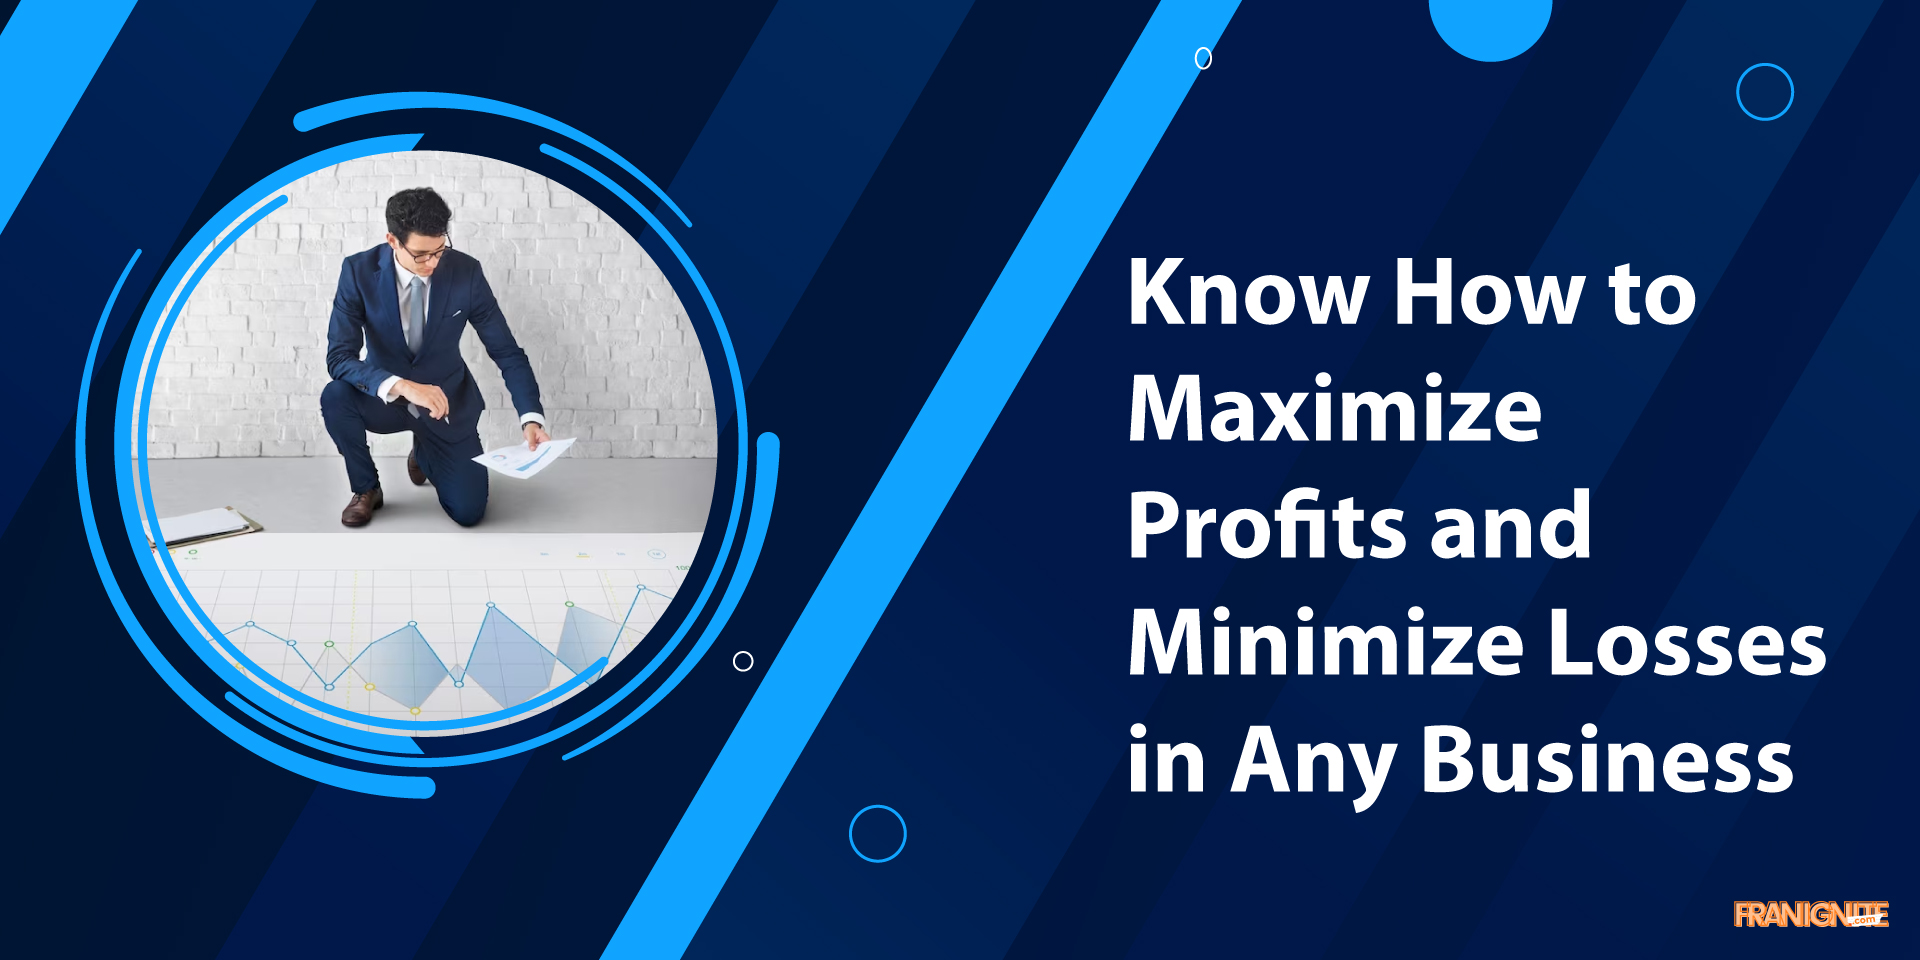 Know How to Maximize Profits and Minimize Losses in Any Business